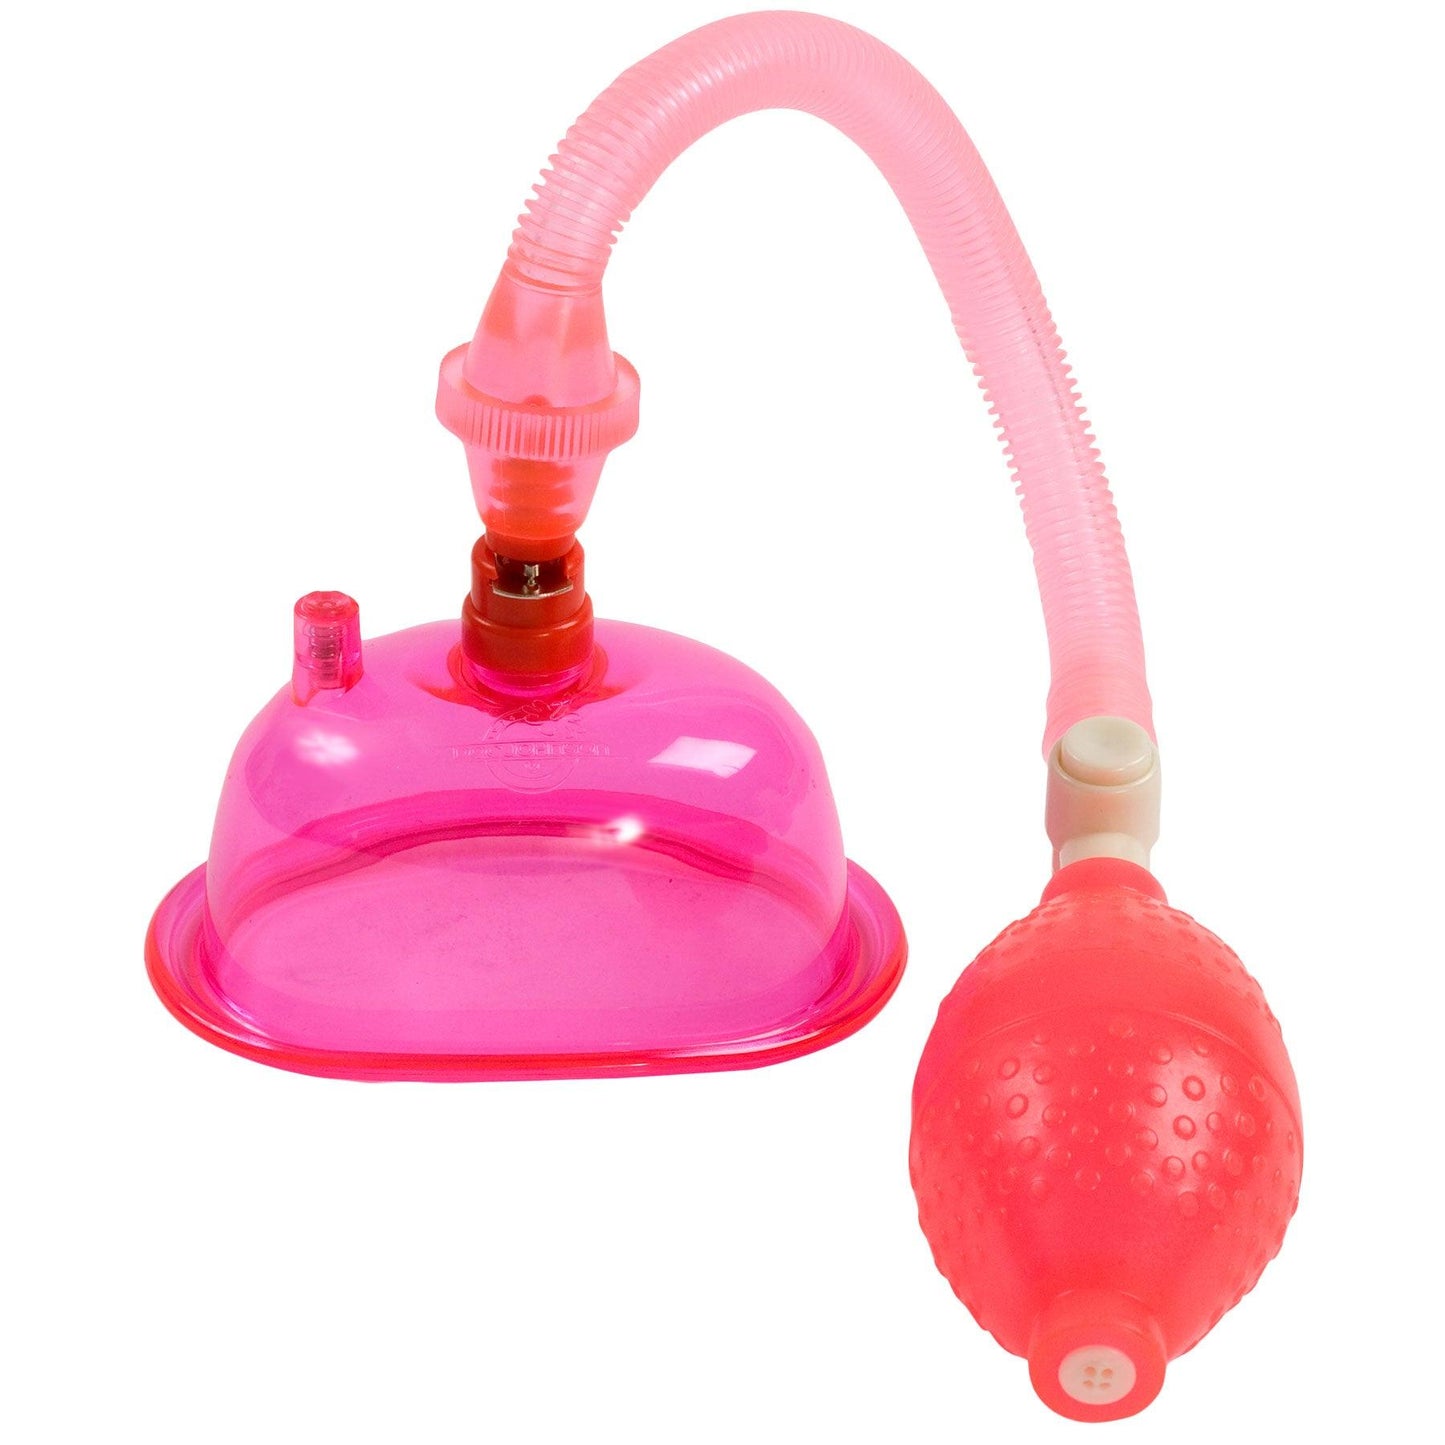 Pussy Pump in a Bag - Pink - My Sex Toy Hub